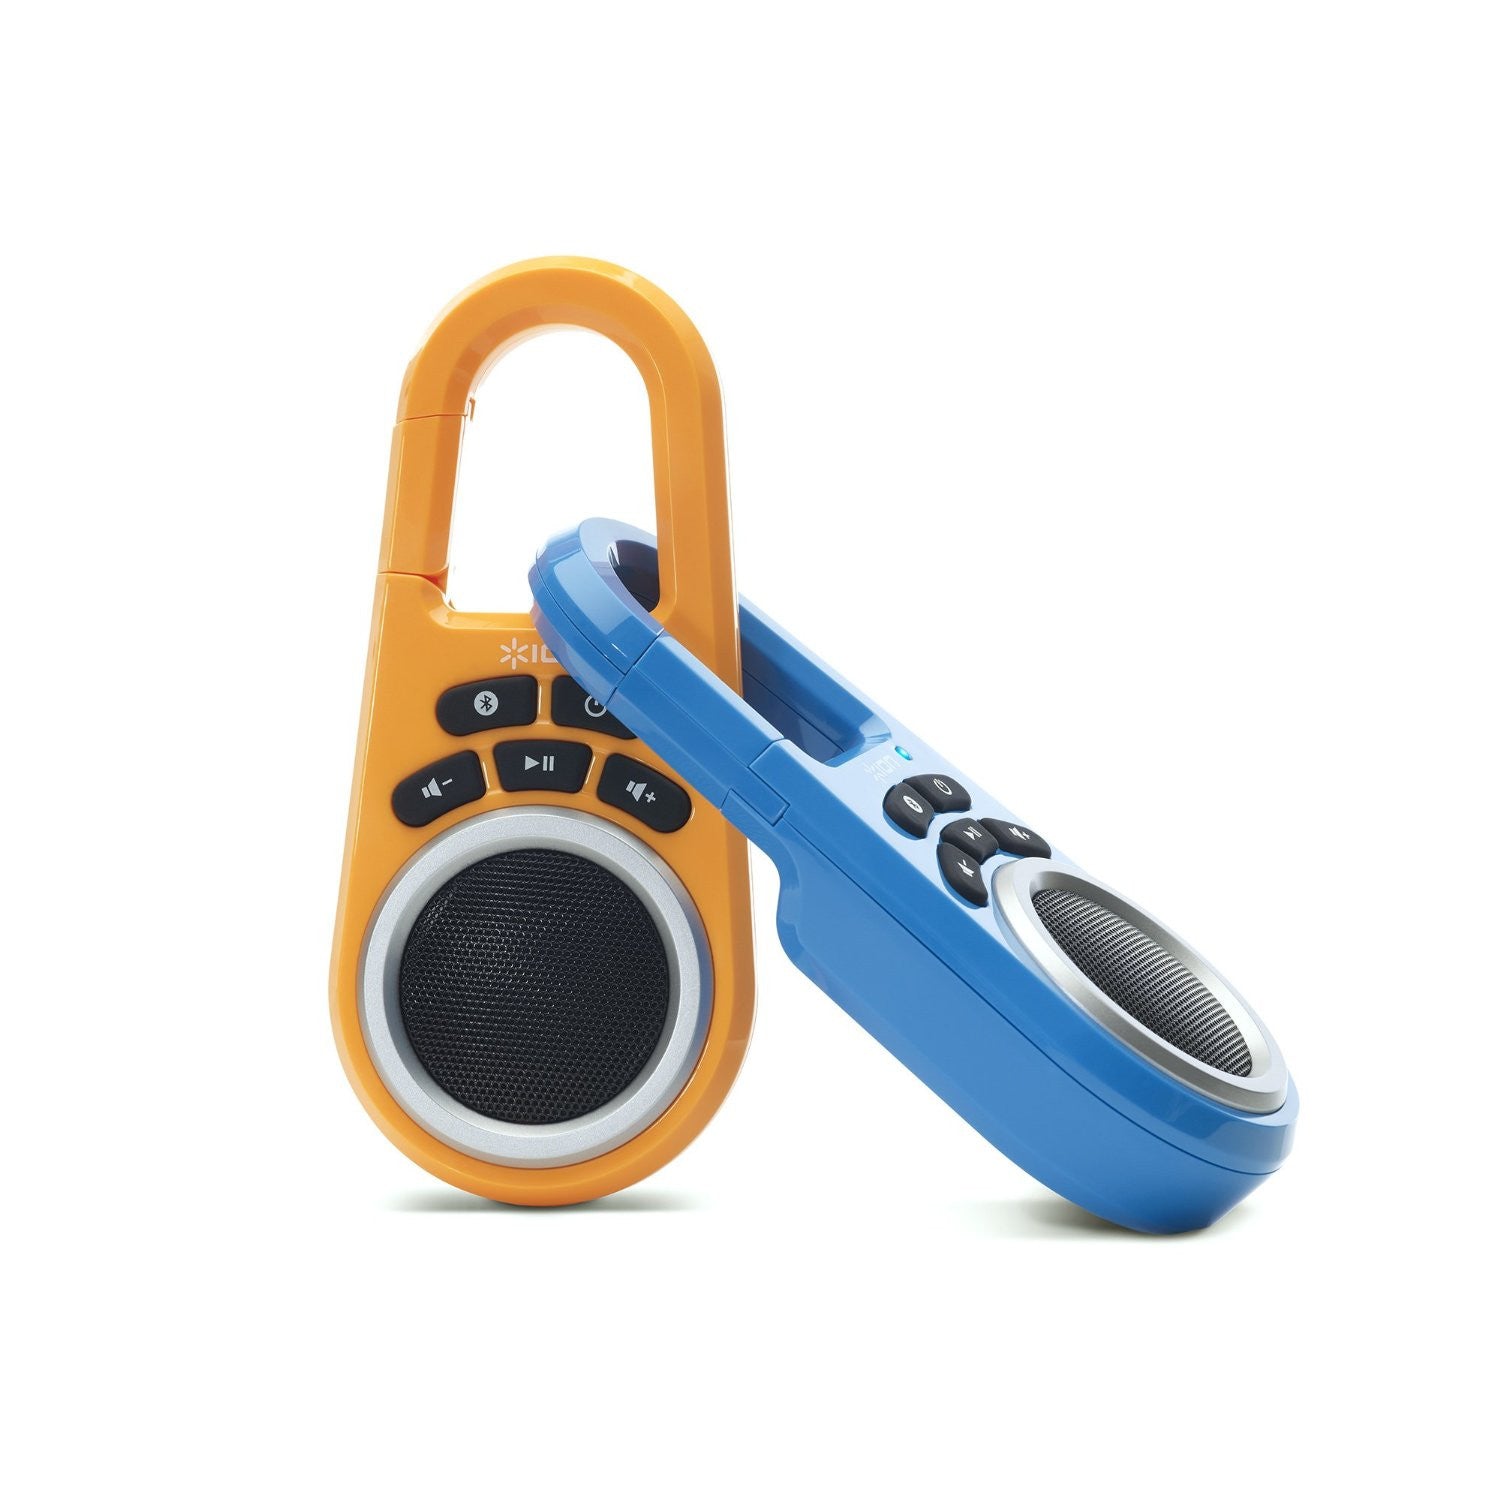 Clipster Wireless Speaker with Built-in Clip